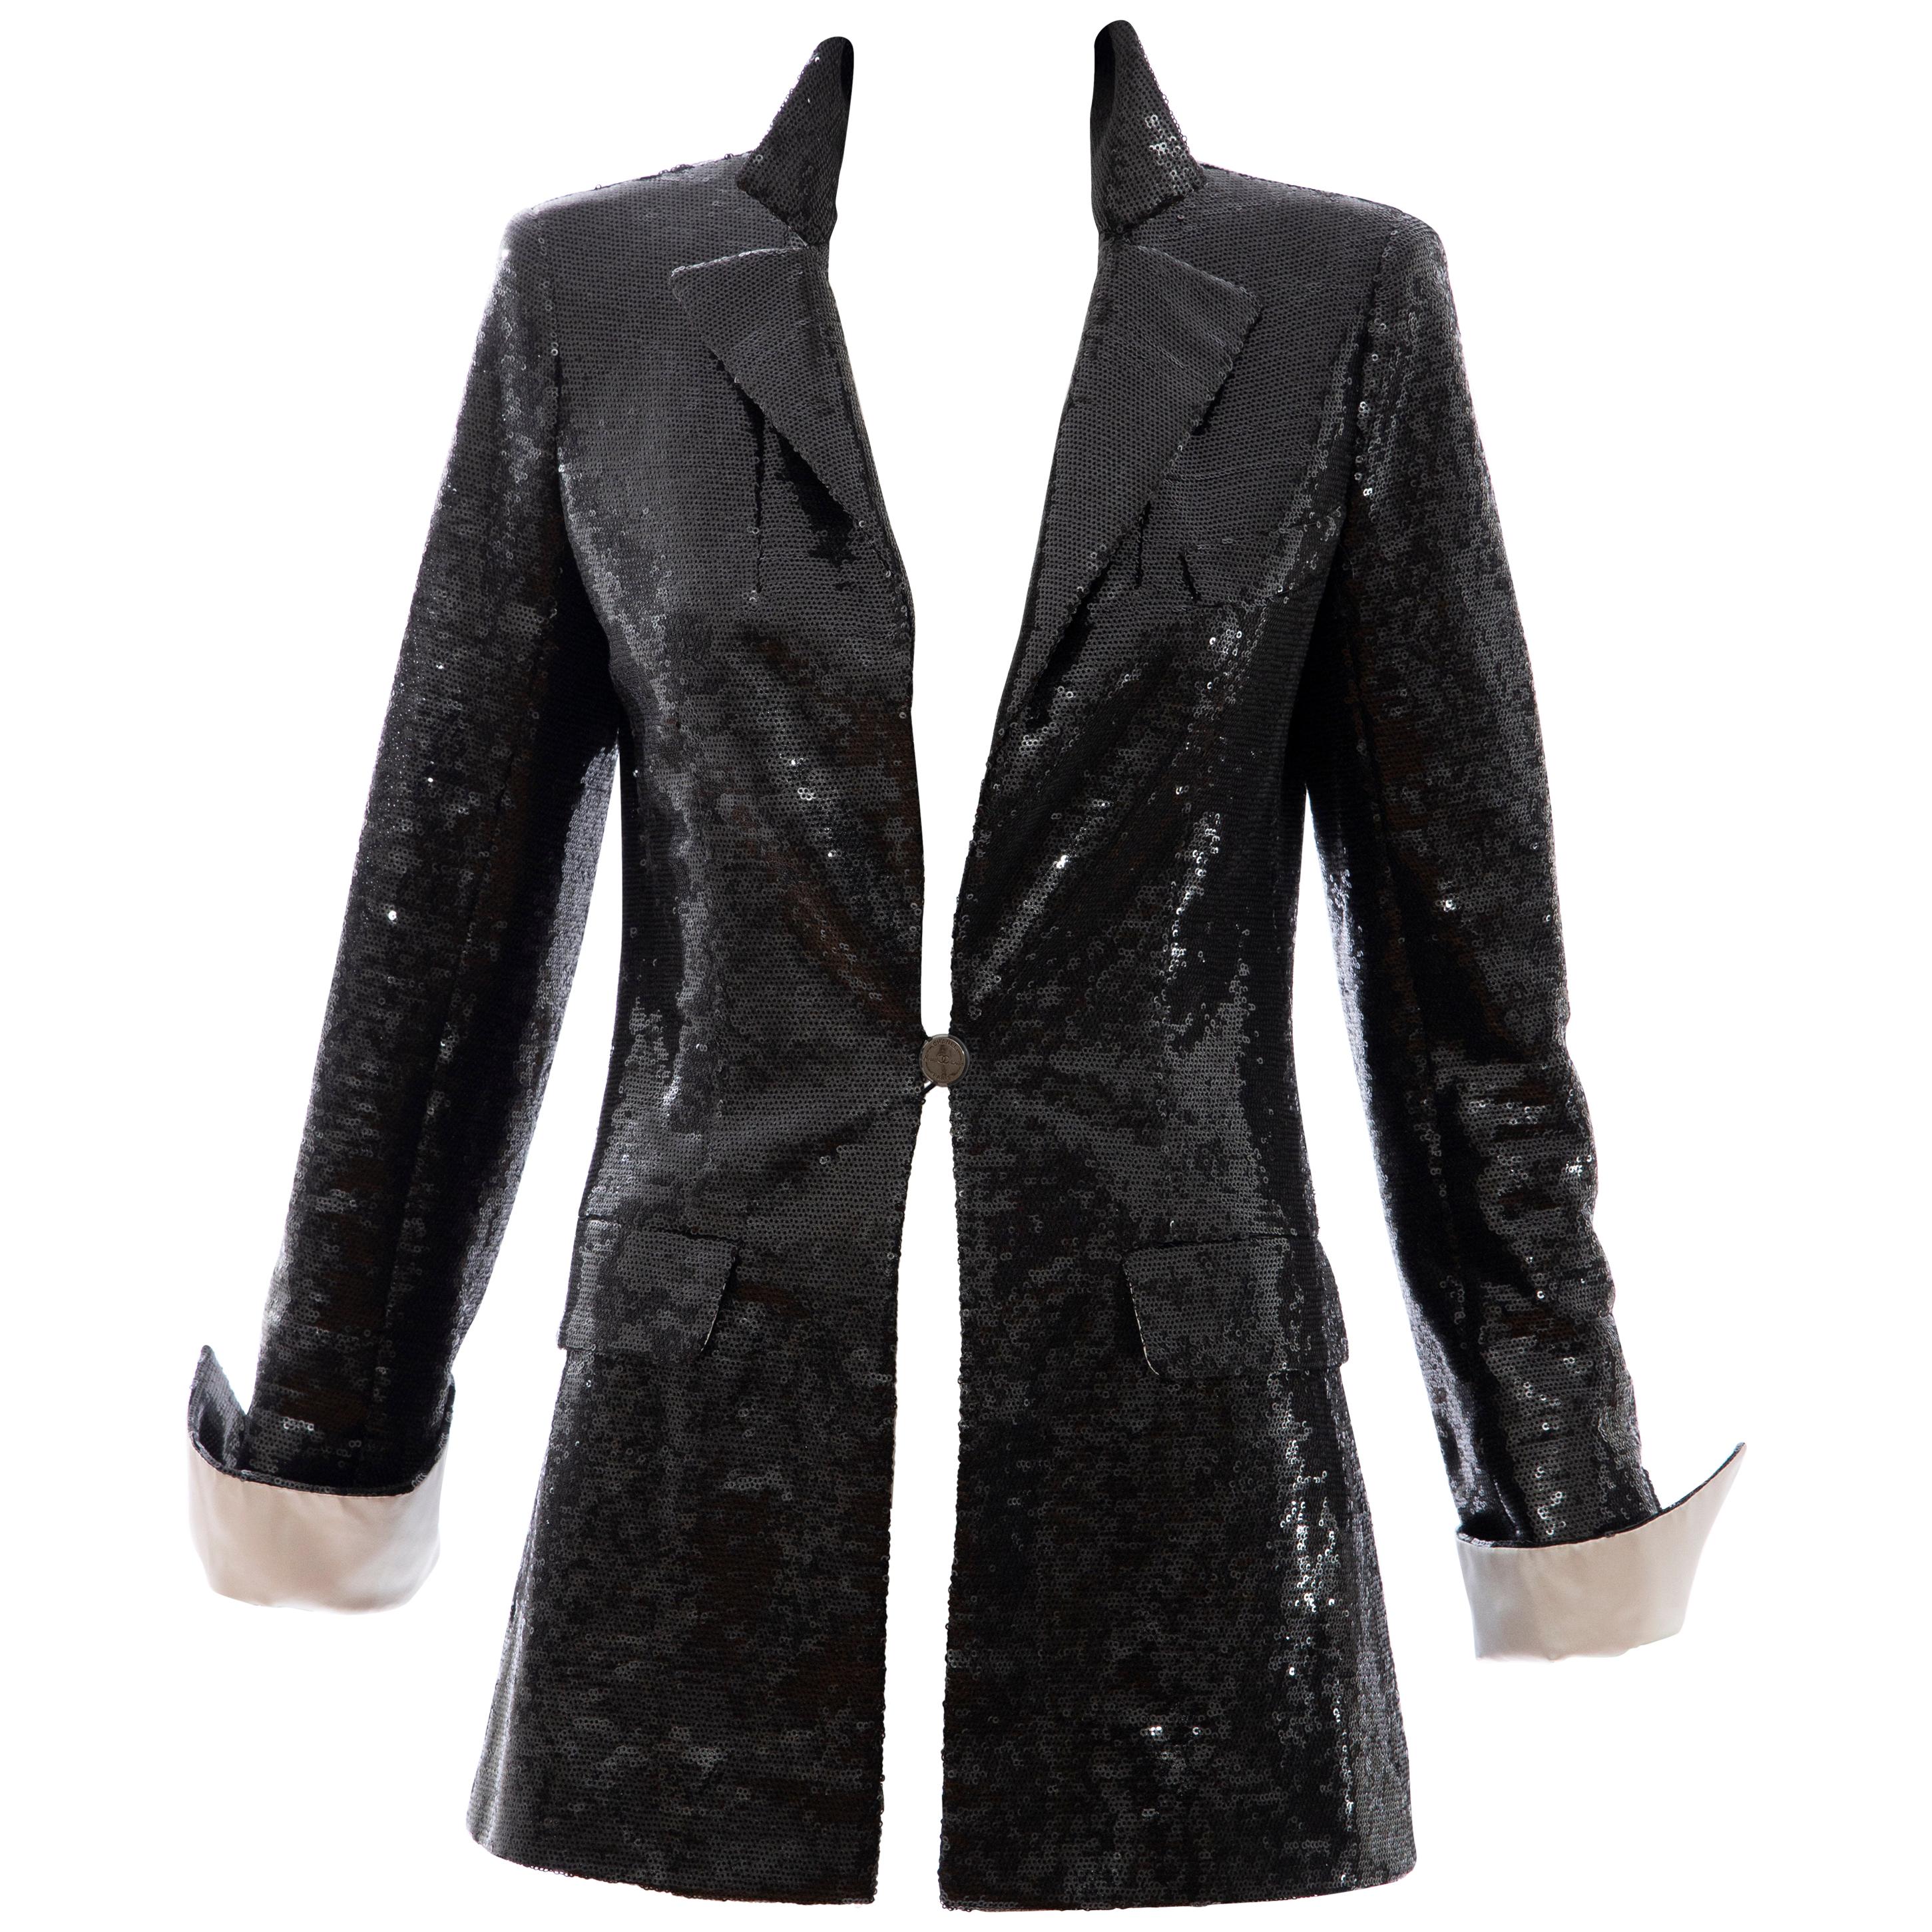 Chanel Black Embroidered Sequin Evening Jacket Ivory Silk Cuffs, Cruise 2009 For Sale